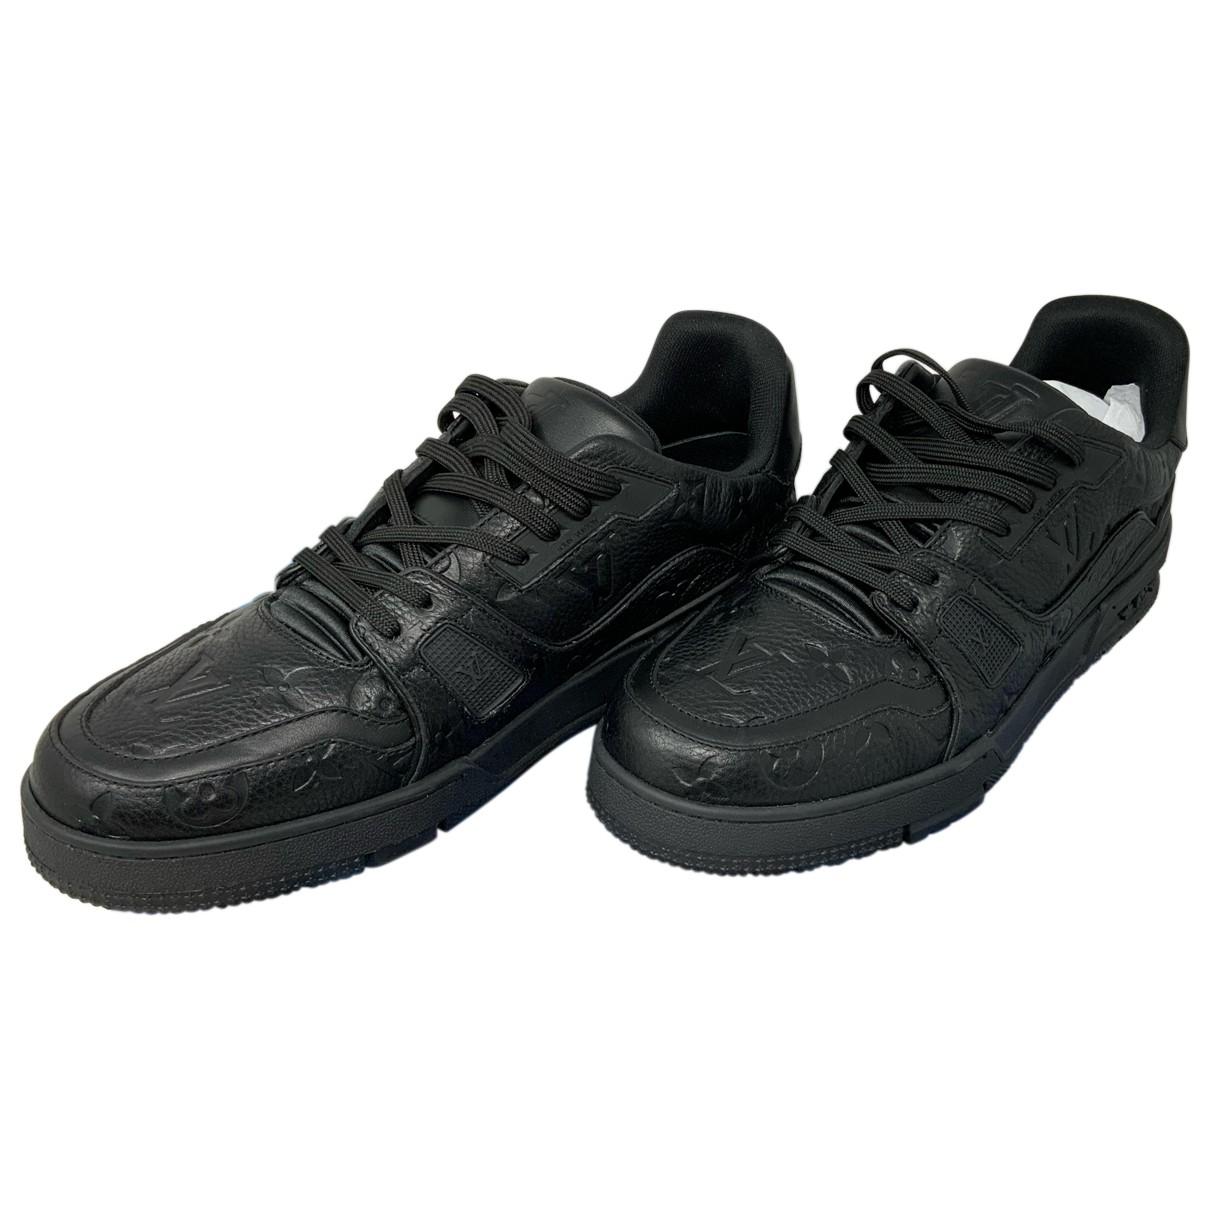 Leather trainers Louis Vuitton Black size 40 EU in Leather - 31947368